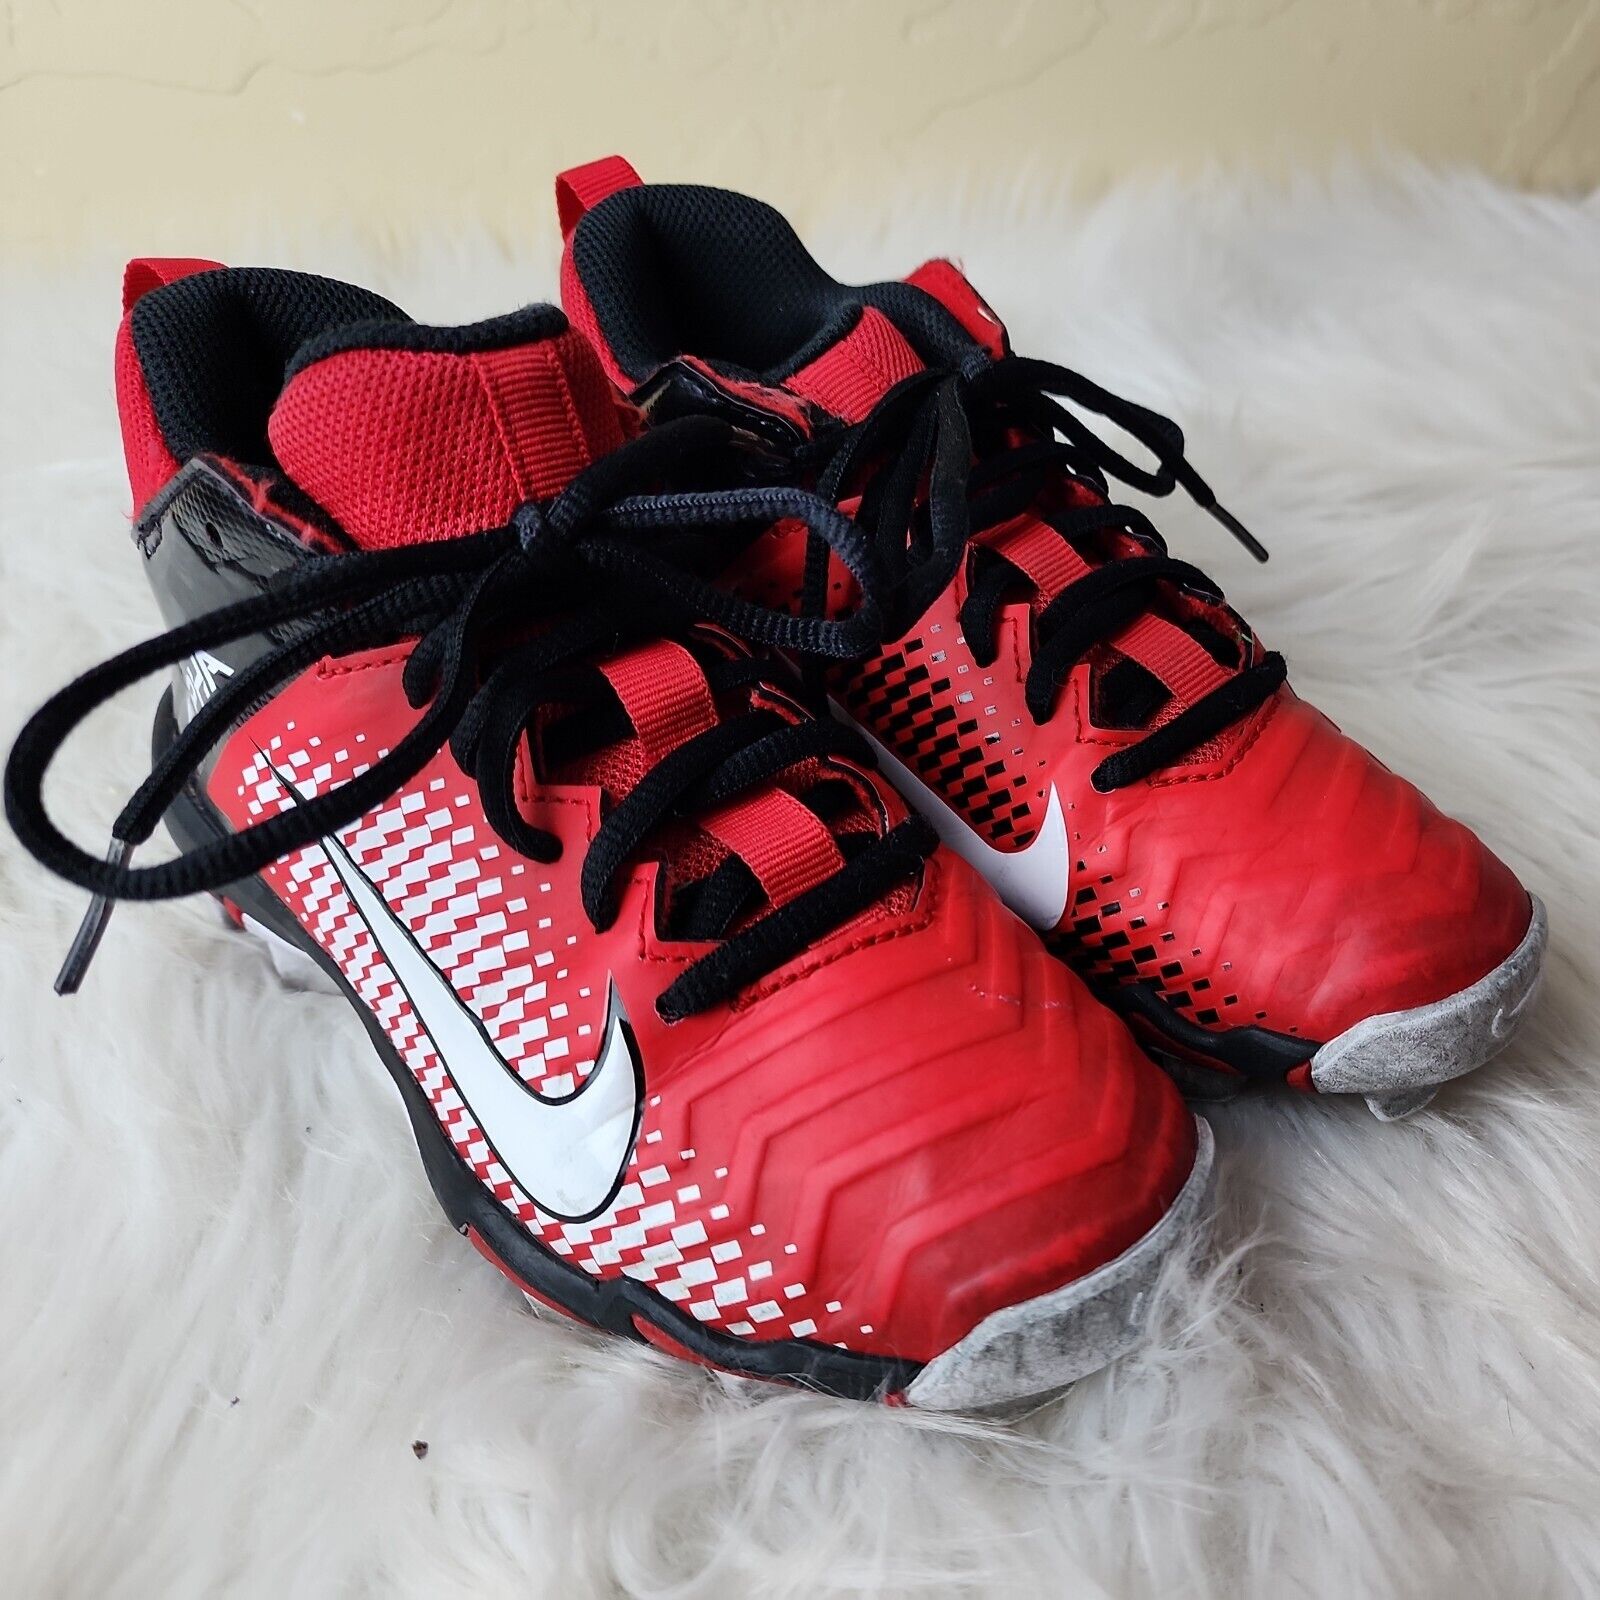 Nike Boys Alpha Menace Shark 2 AQ7654-601 Red Basketball Cleats Shoes Sneaker 1Y